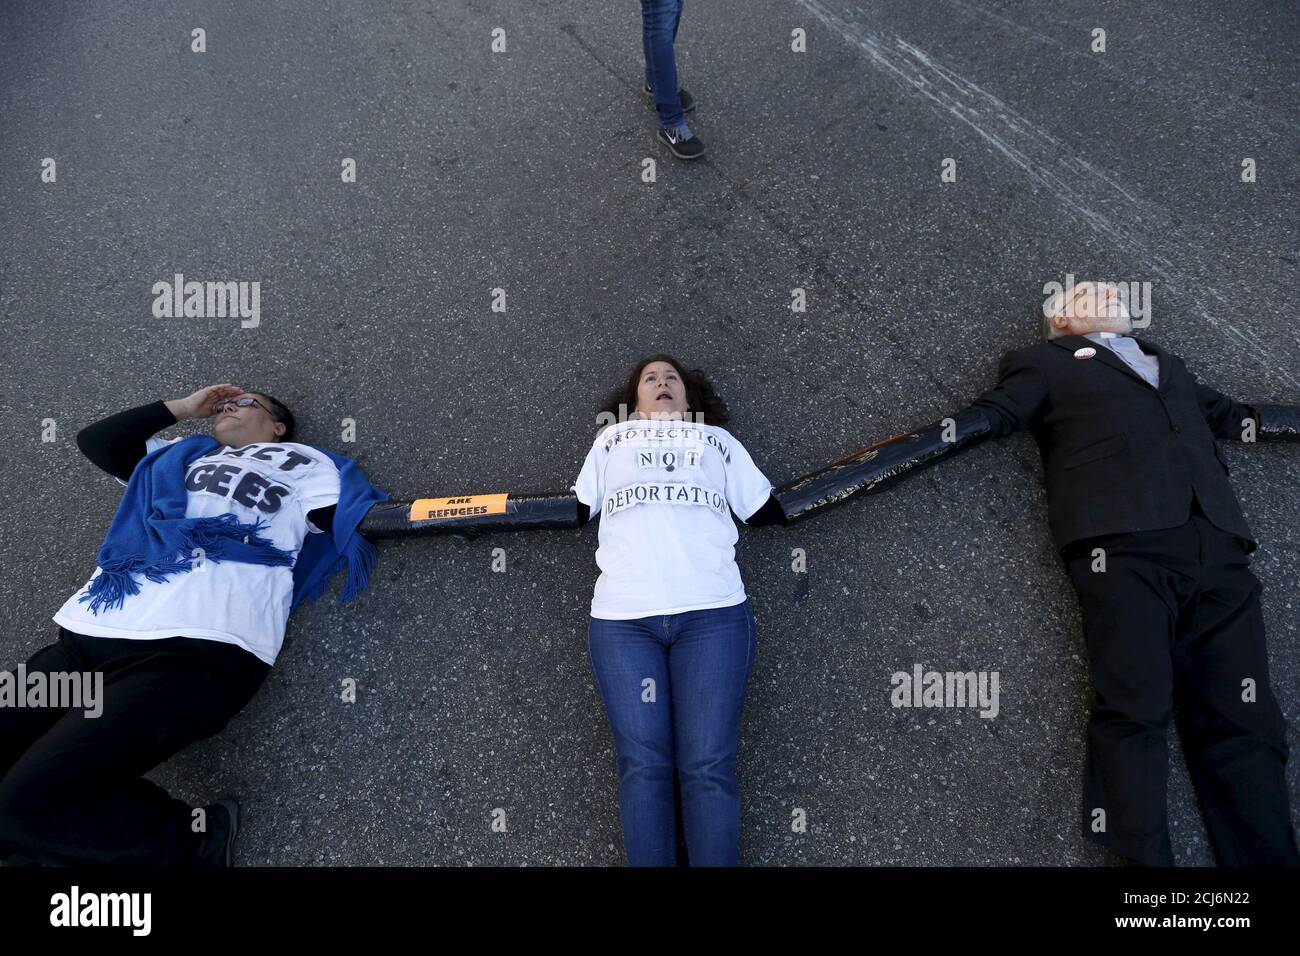 People block an intersection as they gather outside a Federal Building while protesting against Immigration and Customs Enforcement (ICE) raids on Central American refugees in Los Angeles, California January 26, 2016.   REUTERS/Mario Anzuoni      TPX IMAGES OF THE DAY Stock Photo